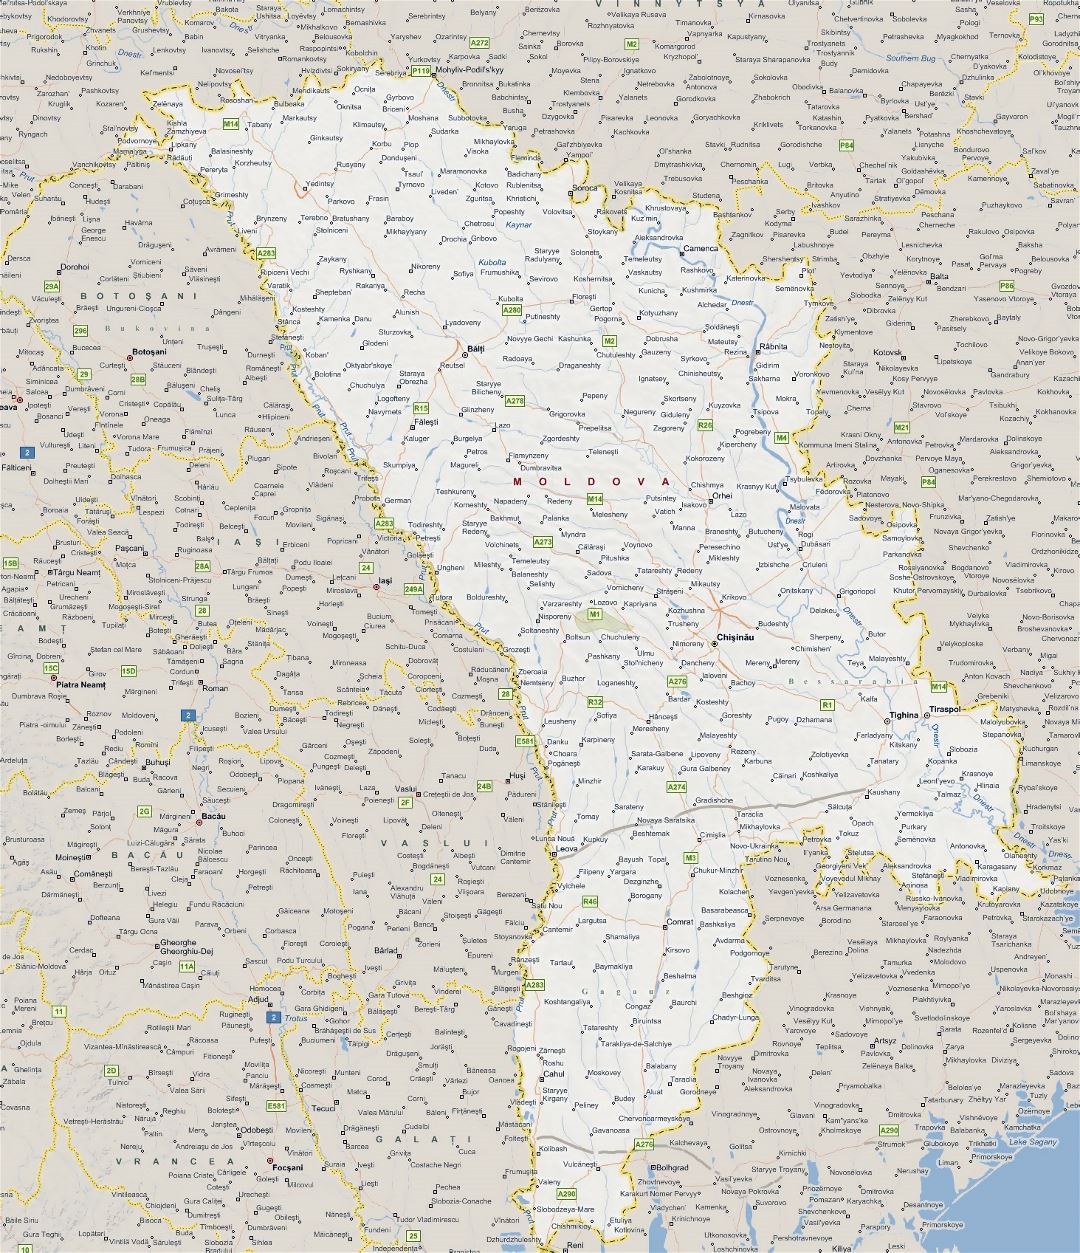 Large map of Moldova with villages and all cities